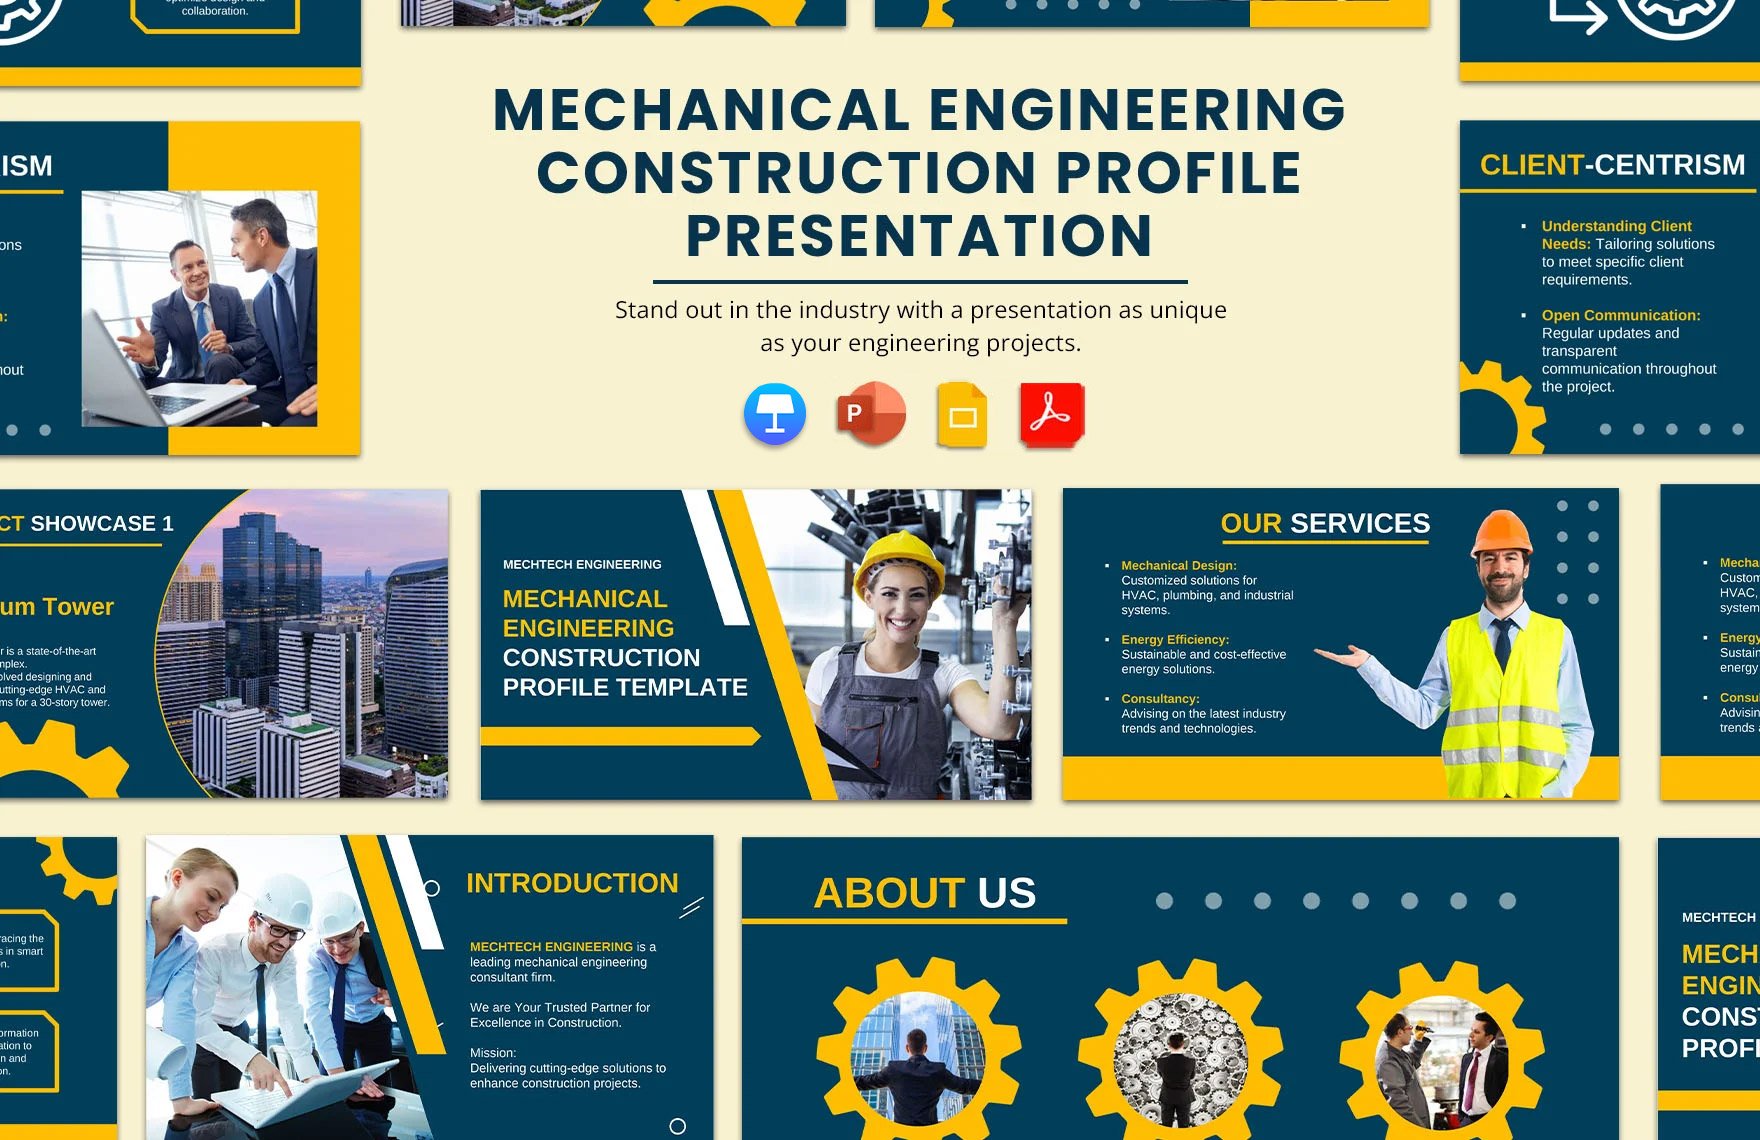 Mechanical Engineering Construction Profile Template